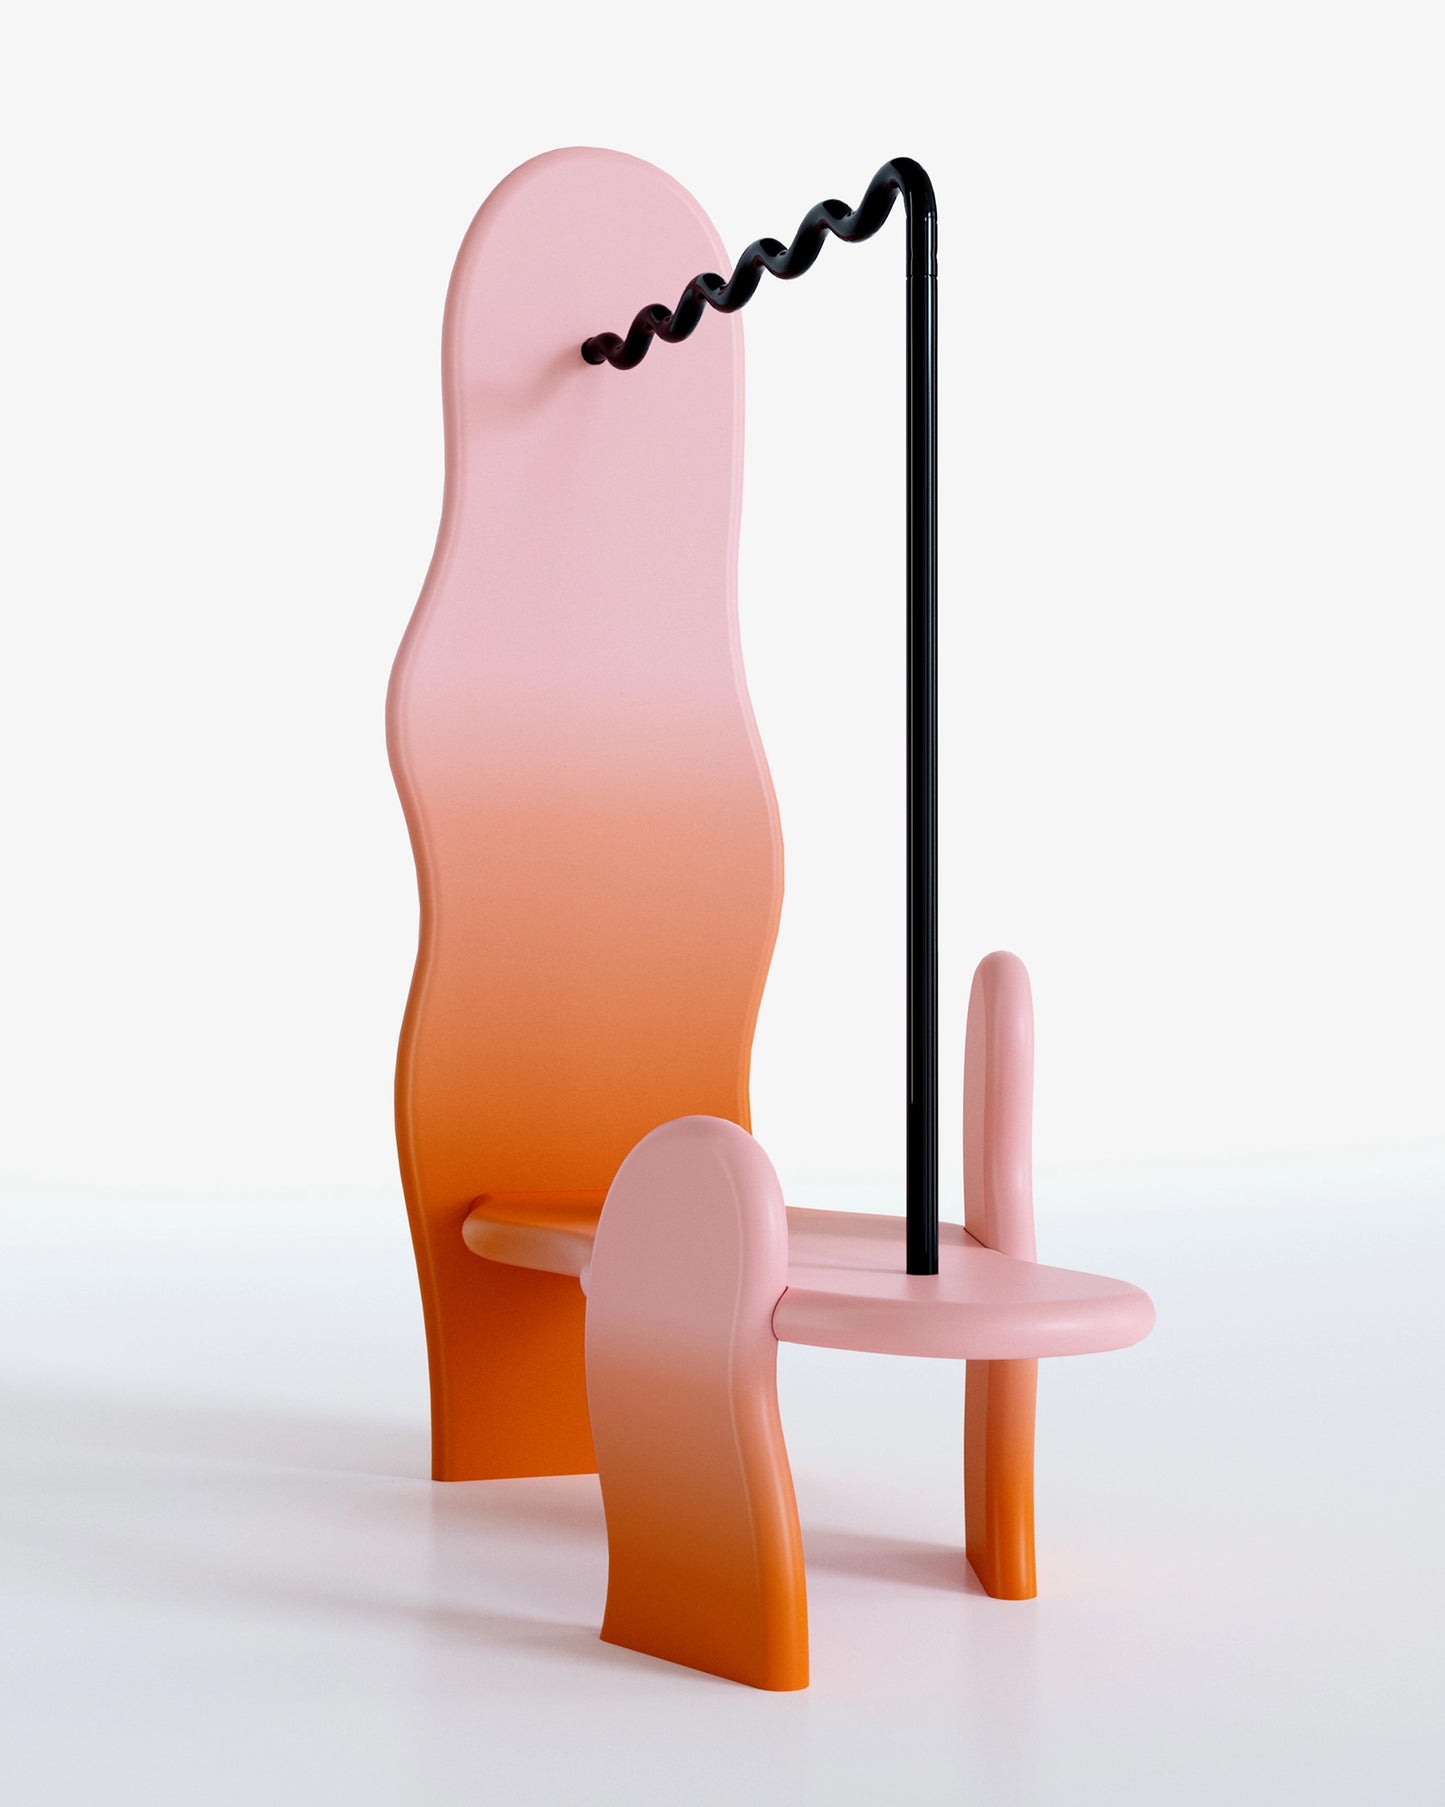 clothing rack with soft shapes and a wavy metal hanging tube, orange-pink gradient